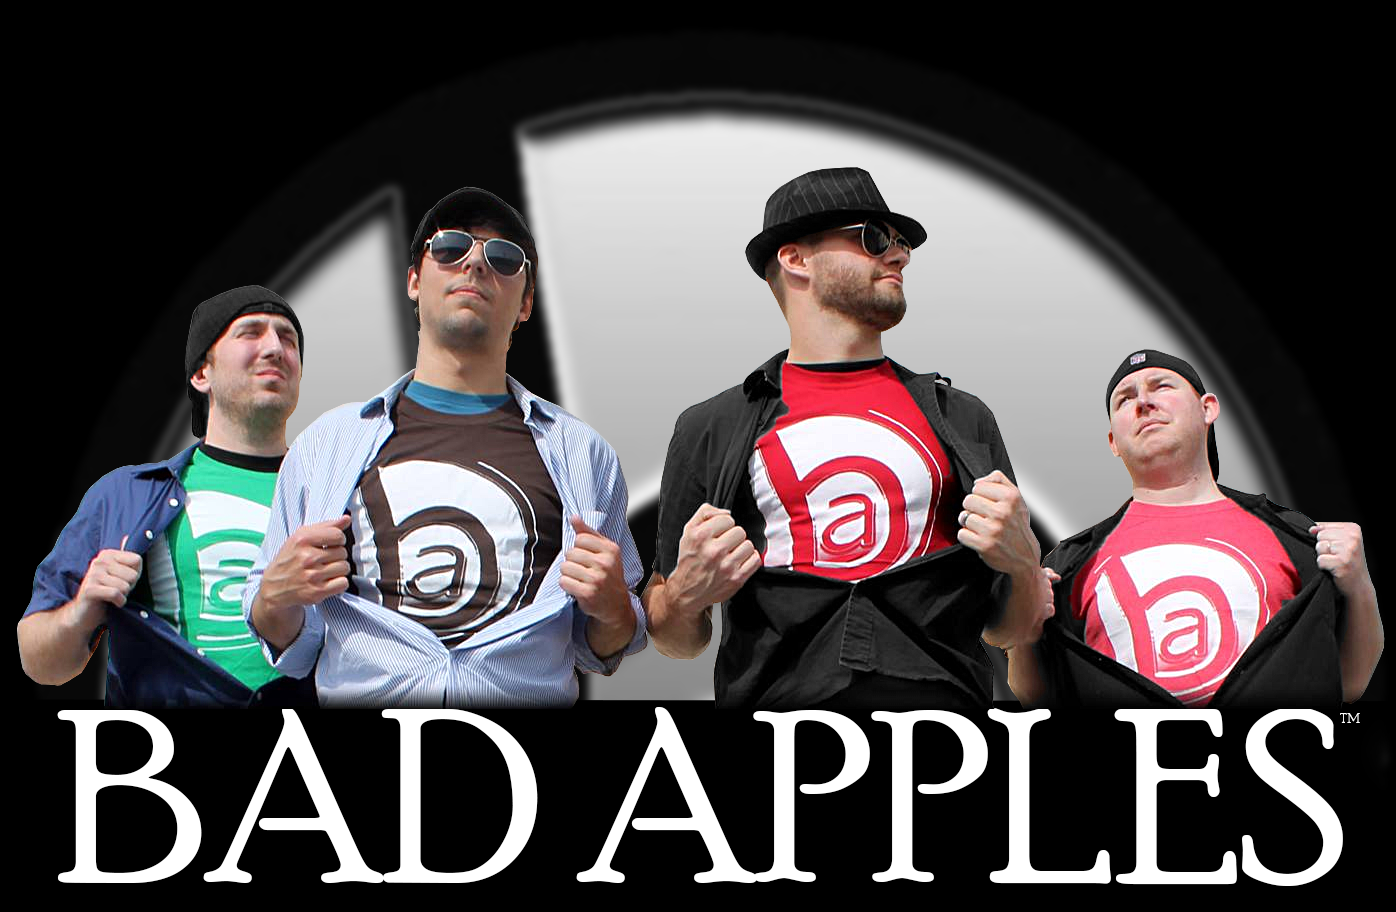 Members of Bad Apples pulling off shirts revealing undershirt with Bad Apples logo T-shirts